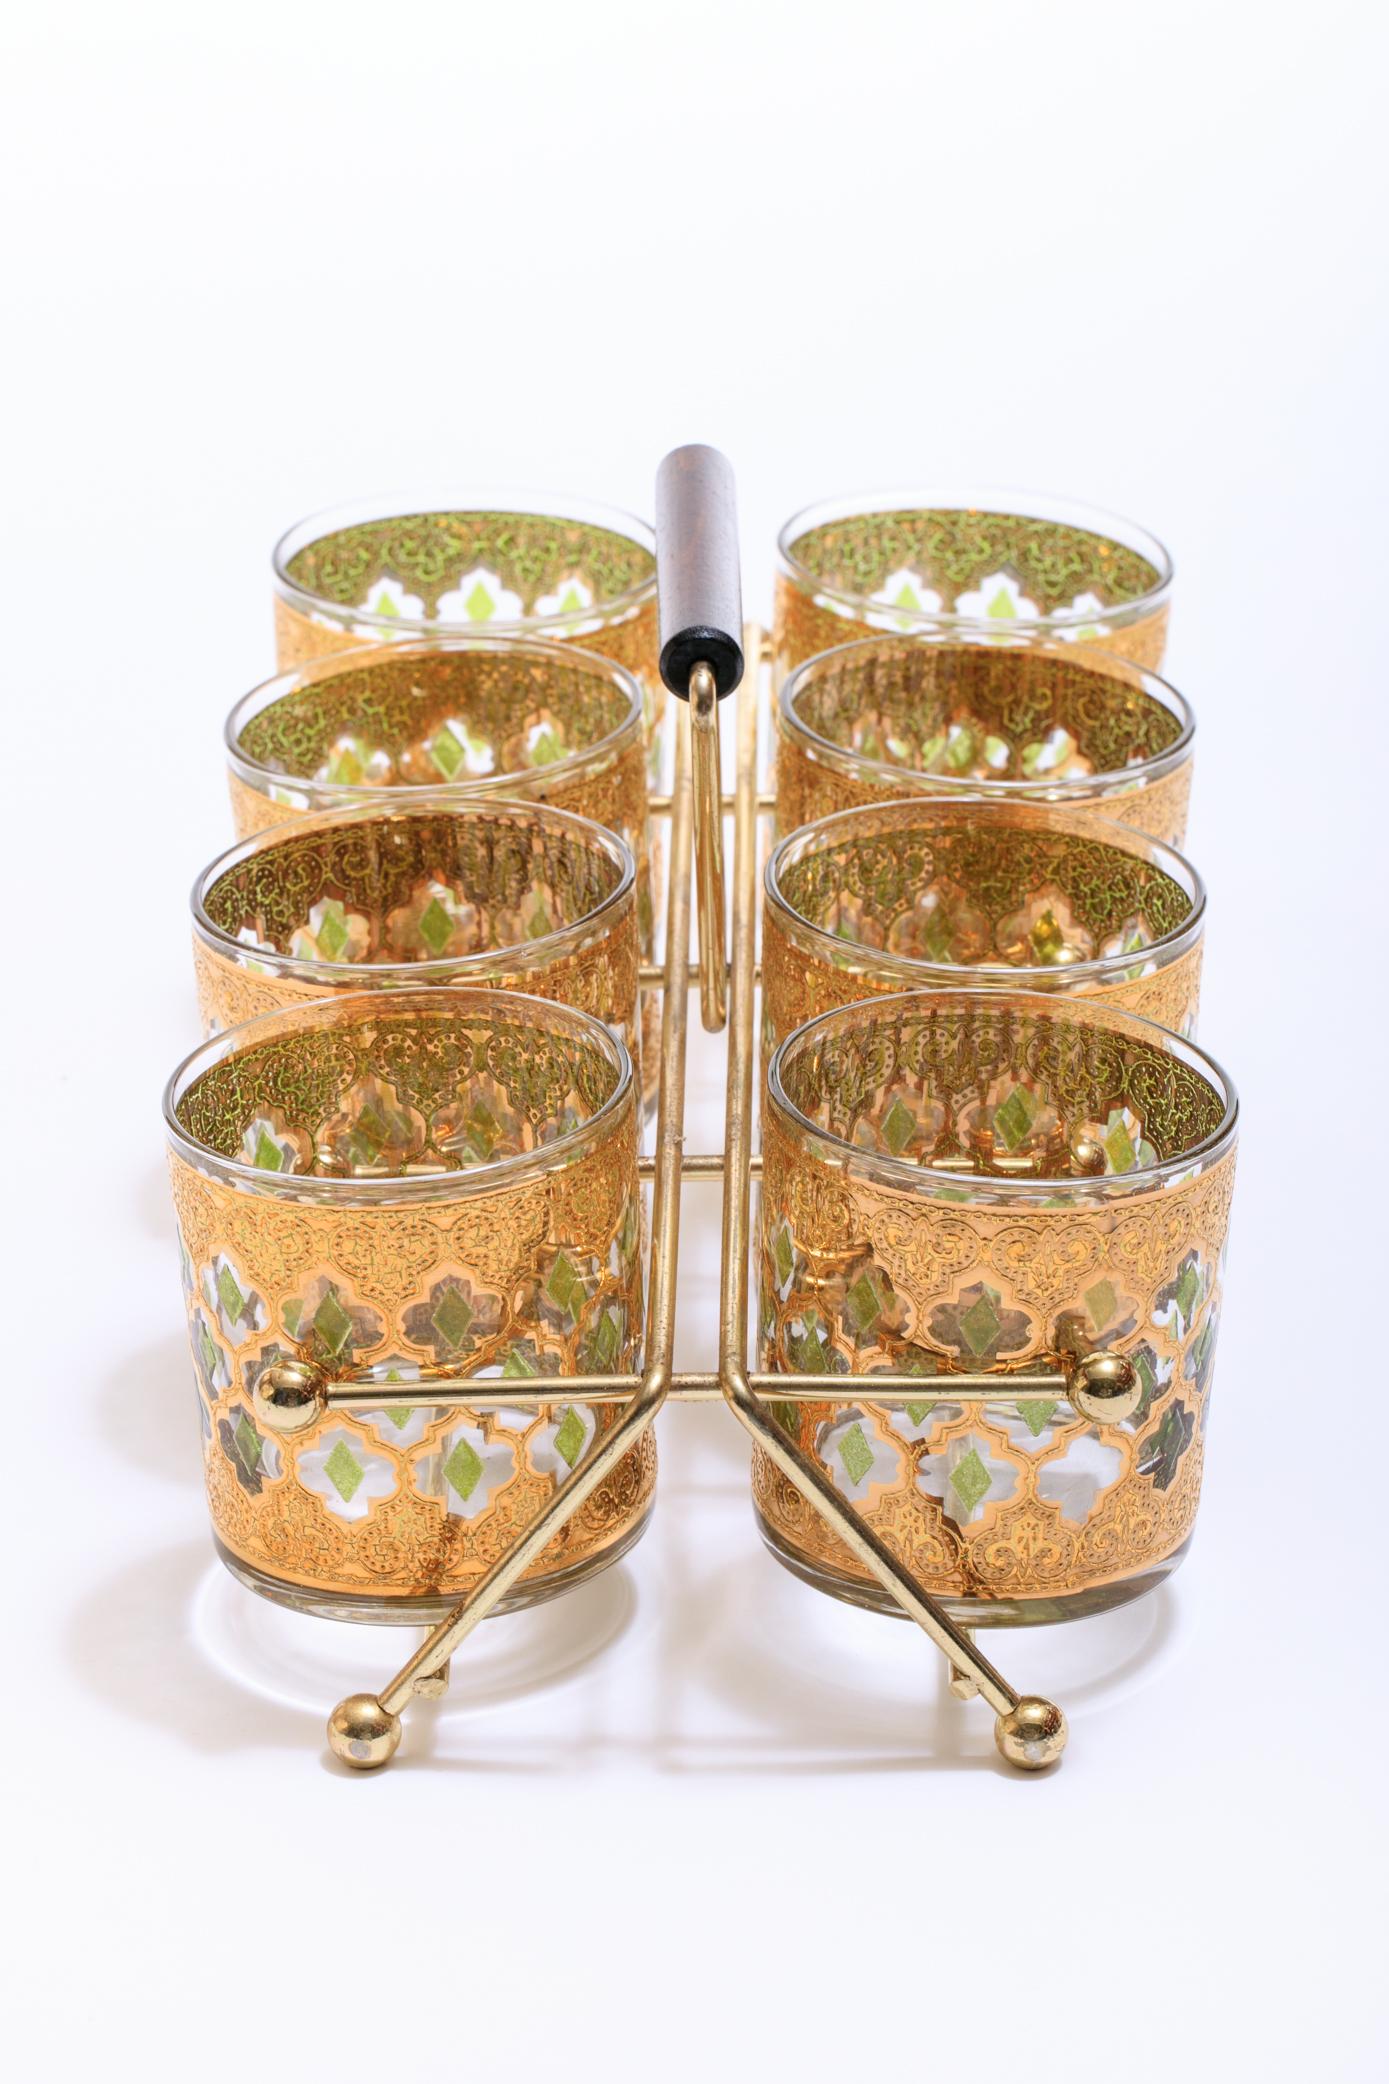 Beautiful set of Moroccan themed rocks glasses with original accompanying carrying tray. Glasses show no wear and are in great condition. Carrier shows light wear. This style was showcased in the feature film 